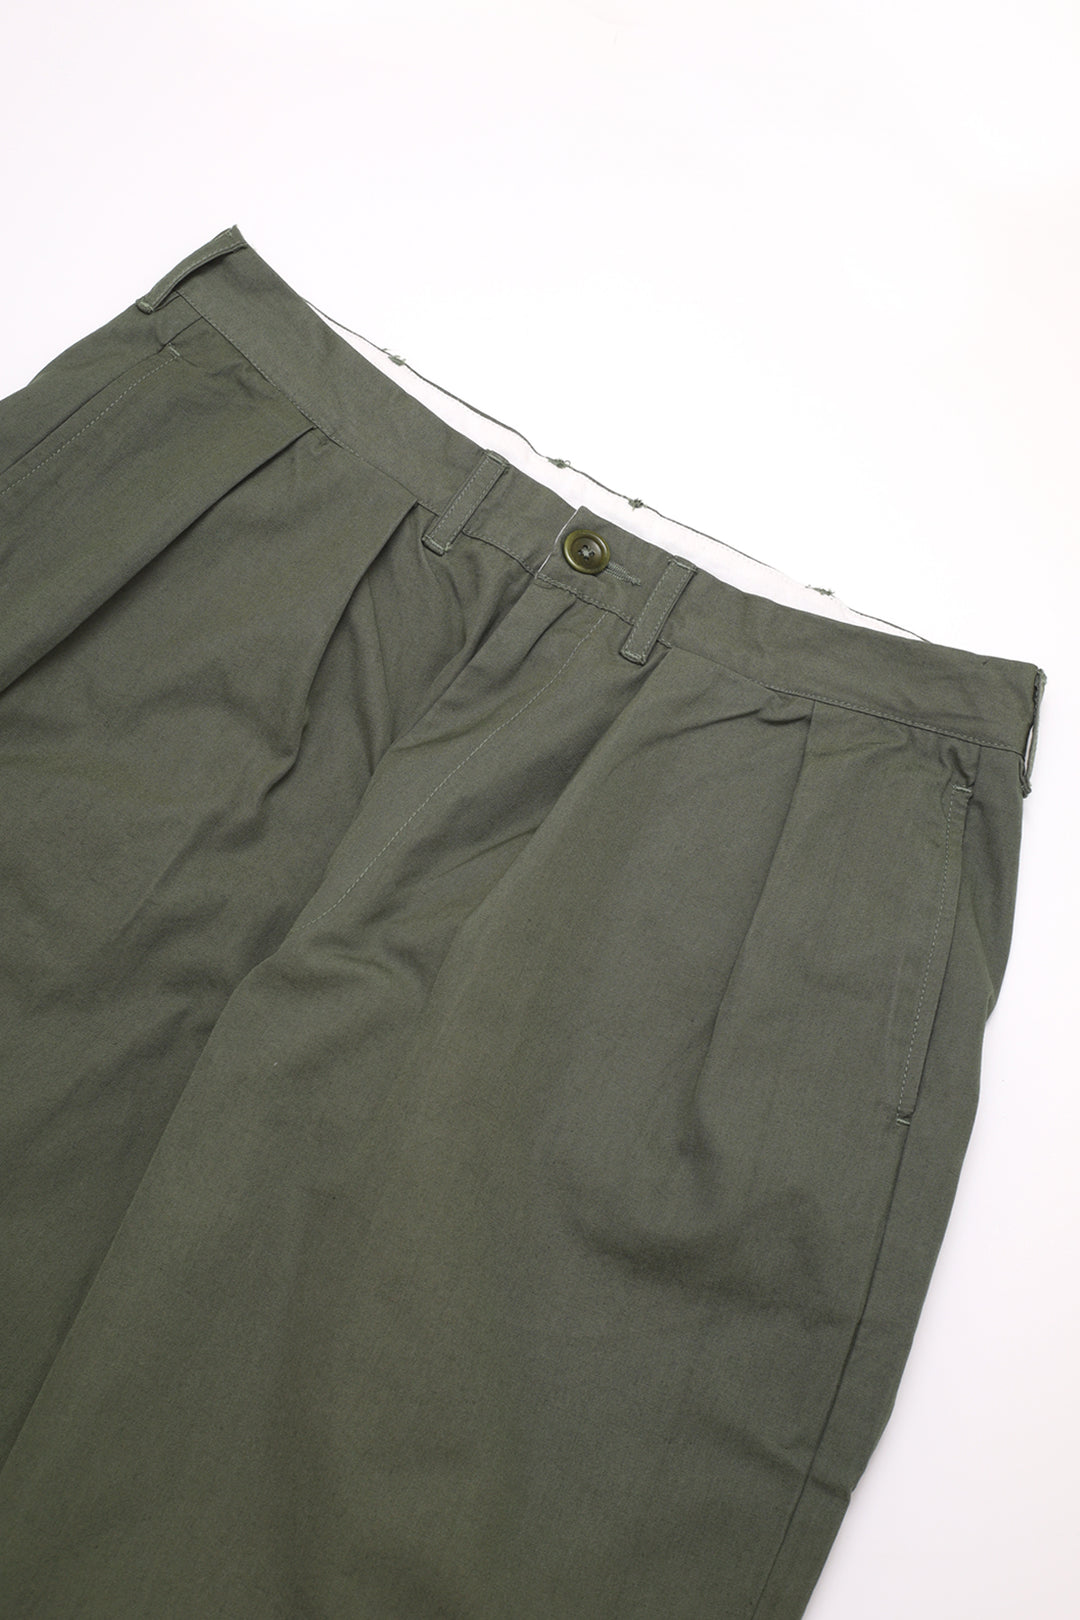 Service Works - Twill Part Timer Pant - Olive